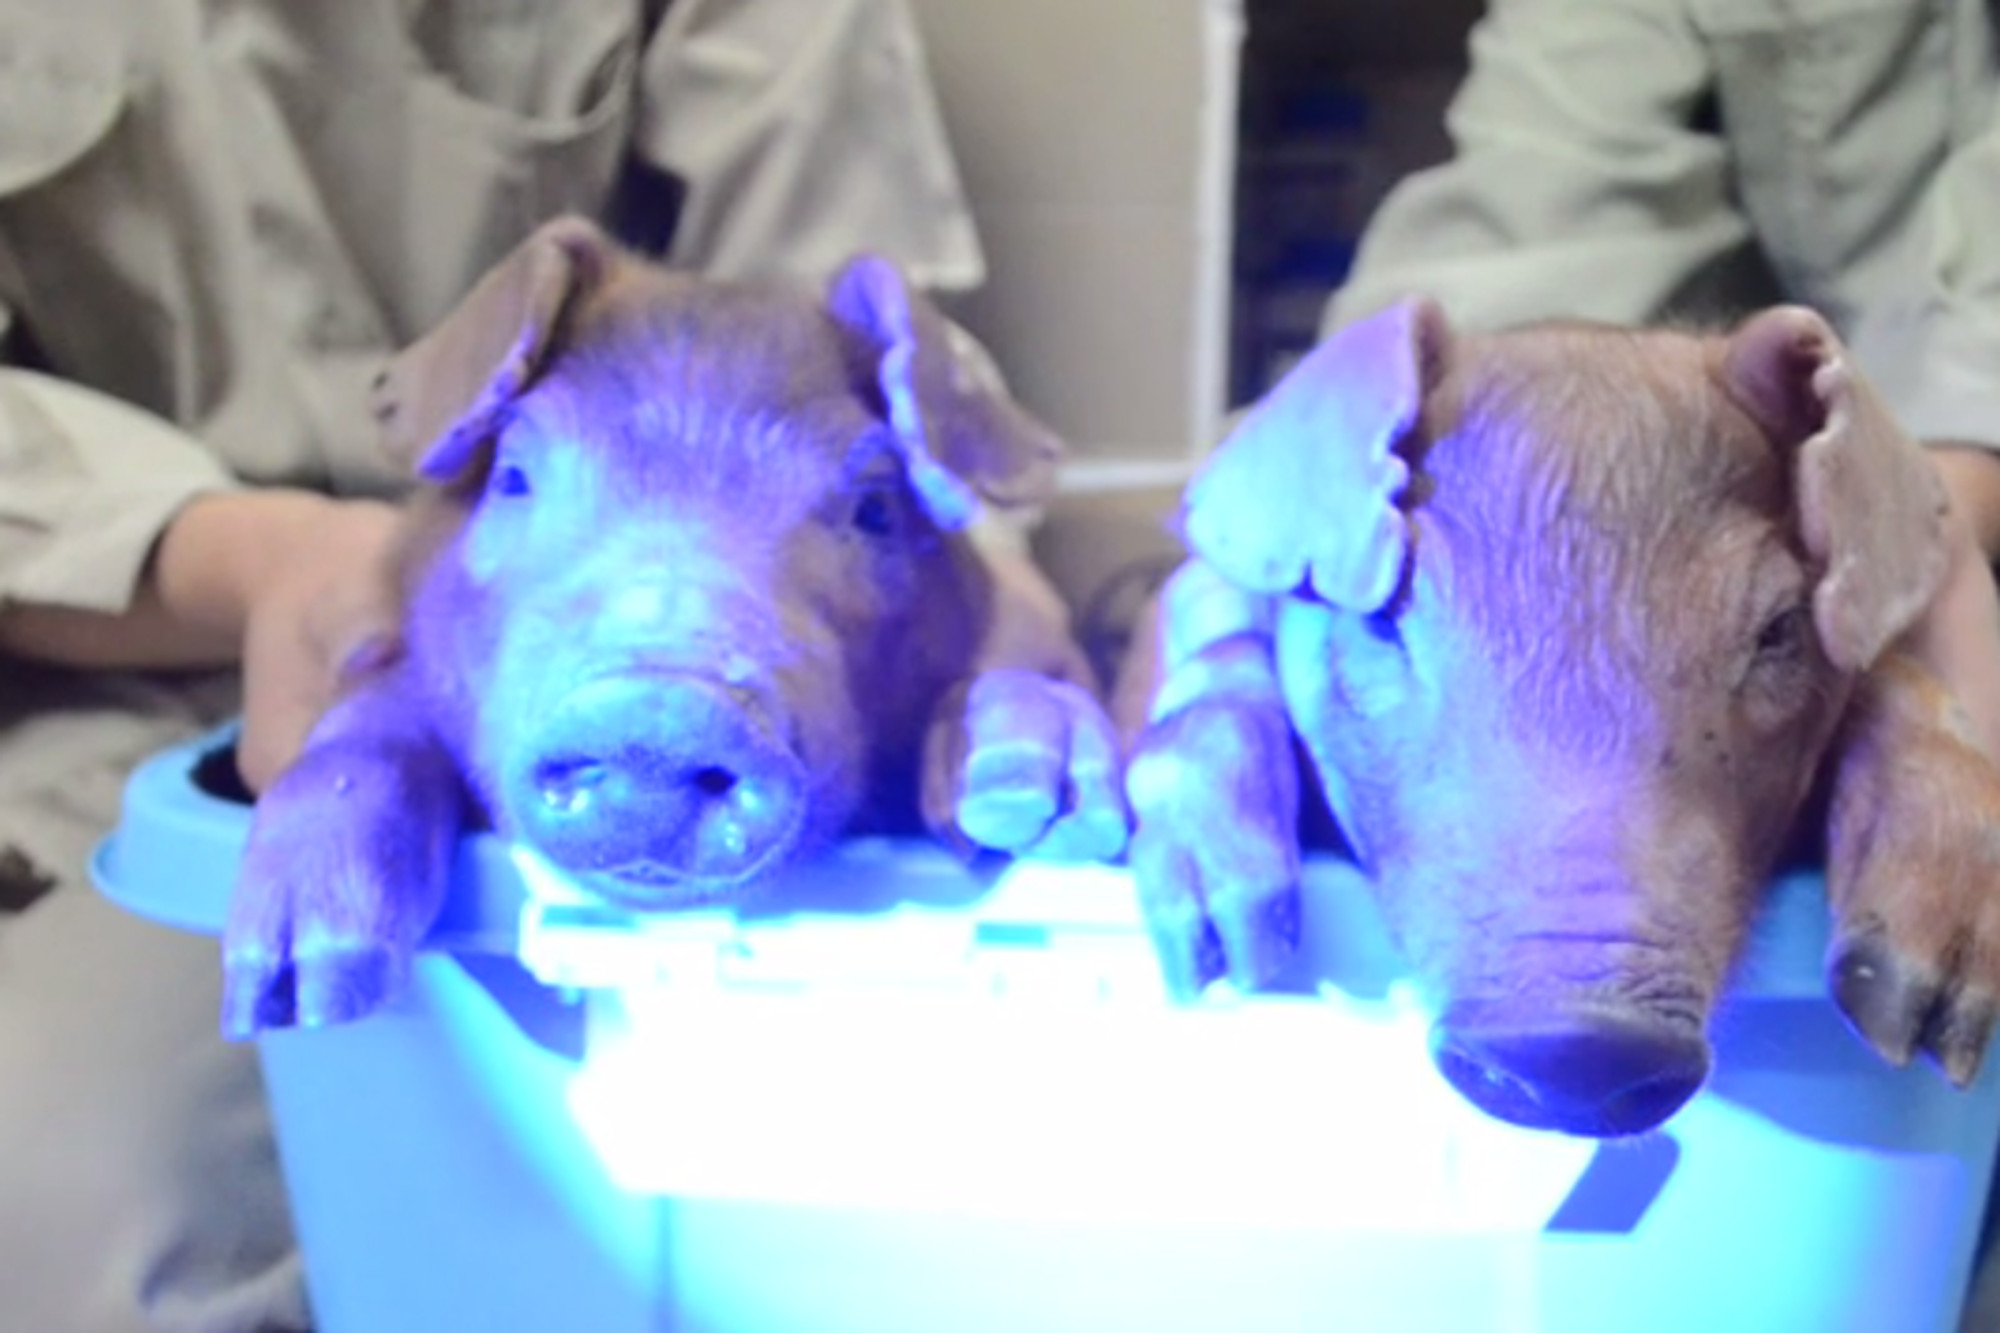 Scientists create glow-in-the-dark pigs using jellyfish DNA - The Verge